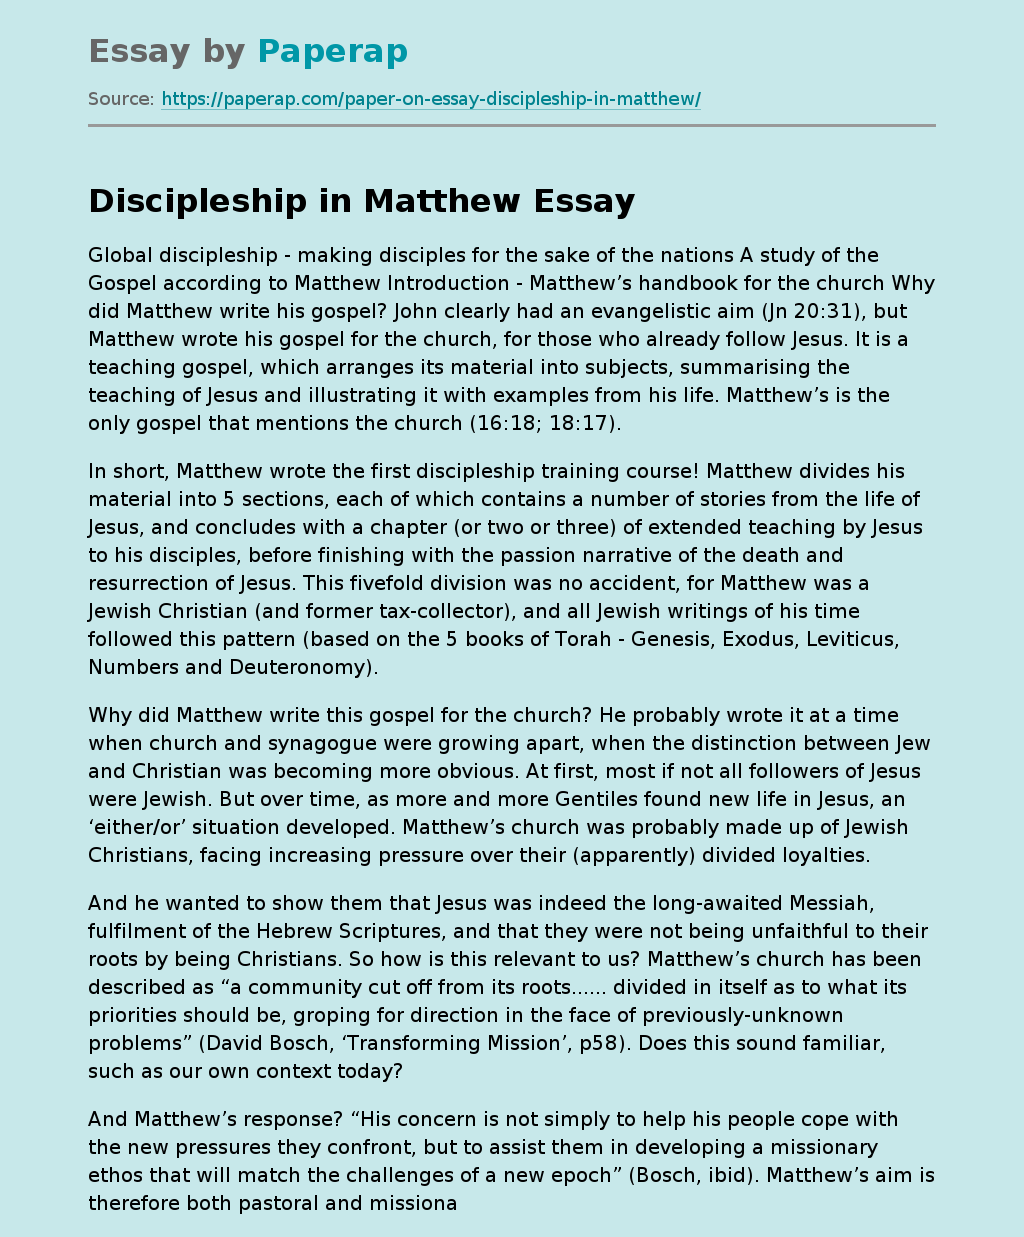 Global Discipleship Is Making Disciples for the Nations